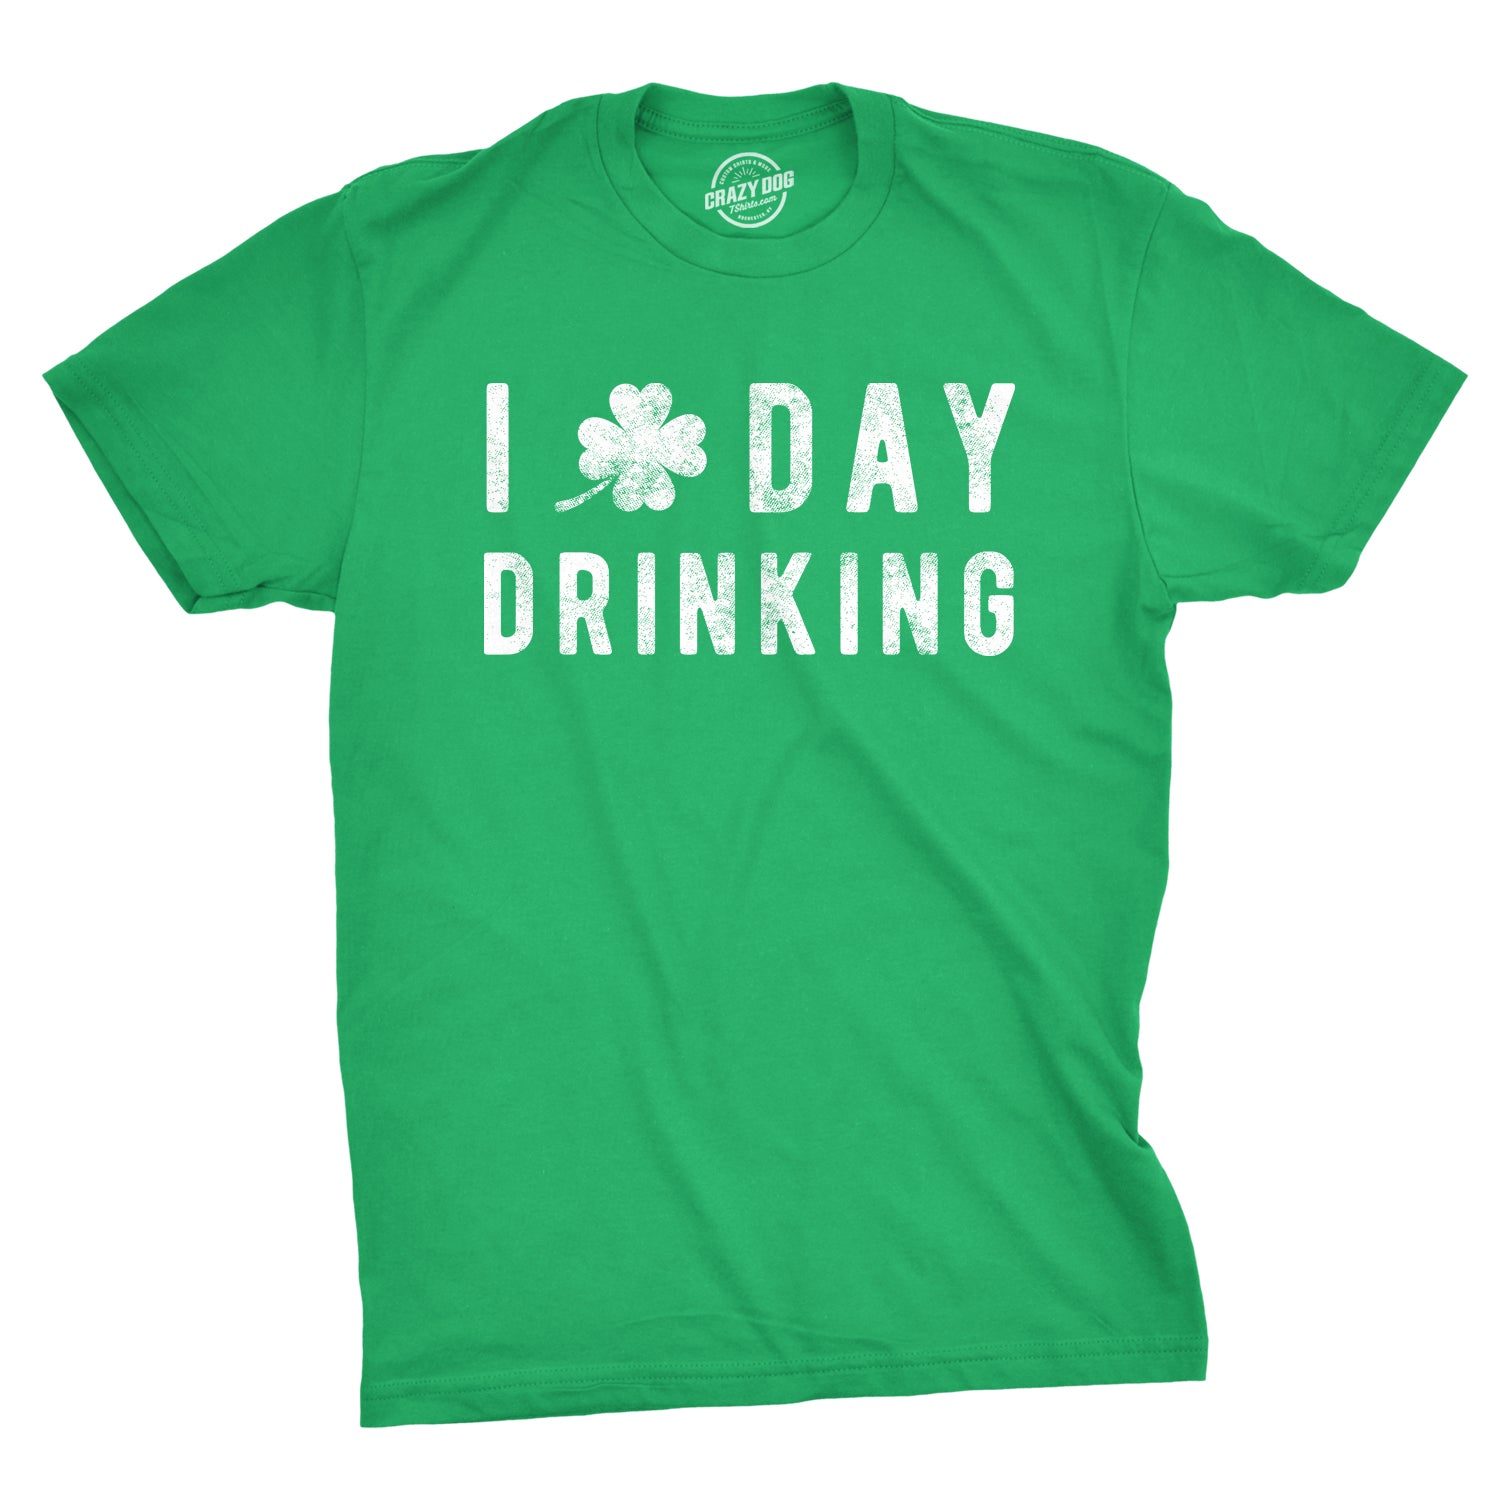 Funny Green I Clover Day Drinking Mens T Shirt Nerdy Saint Patrick's Day Drinking Tee